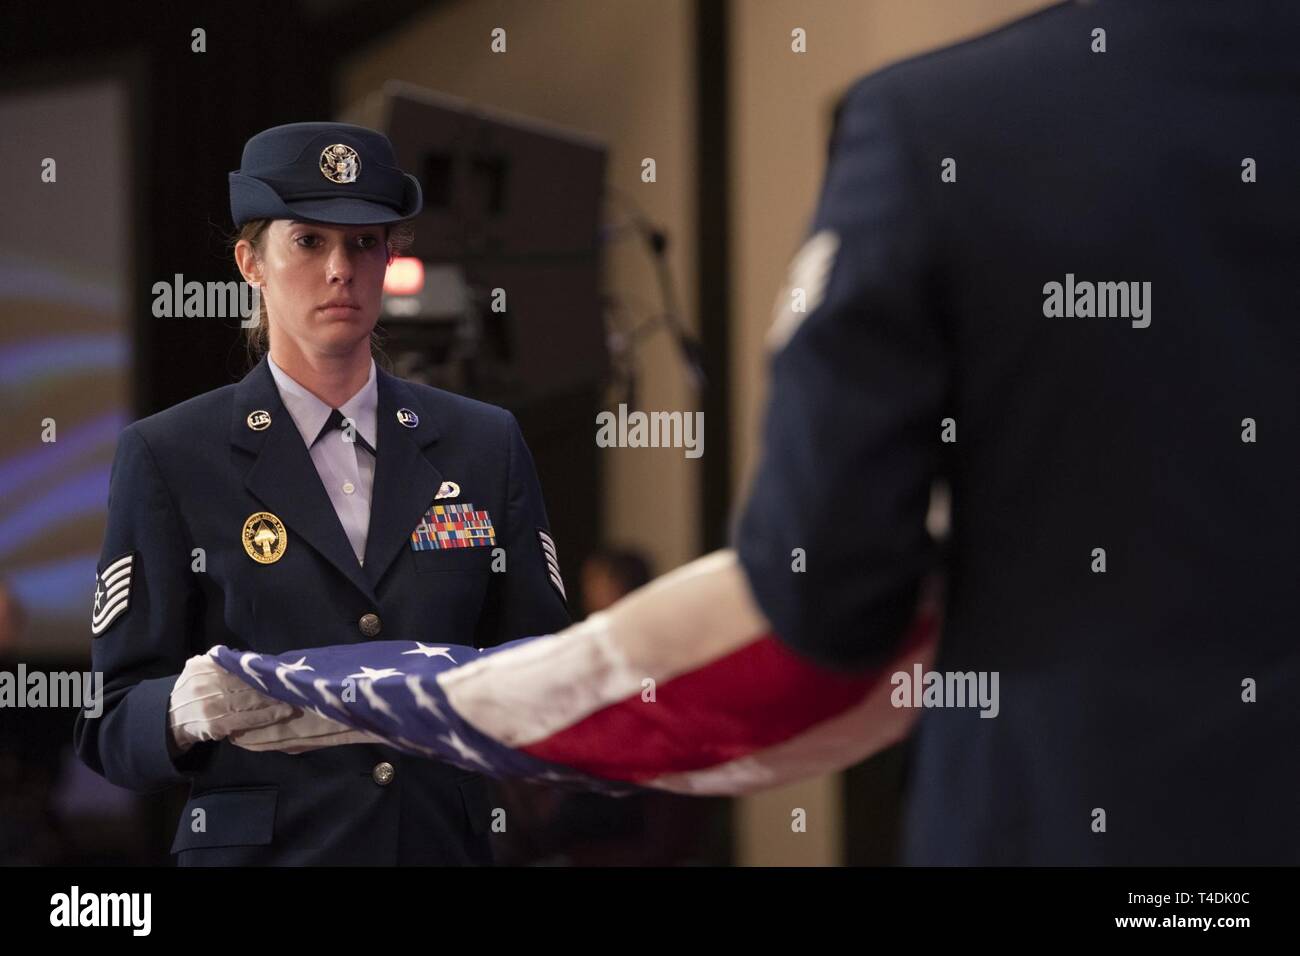 The commander of U.S. Special Operations Command, U.S. Army Gen. Raymond A. Thomas III, is presented a flag during his retirement ceremony, Tampa, Florida, March 29, 2019. Thomas retired after nearly four decades of service. Stock Photo